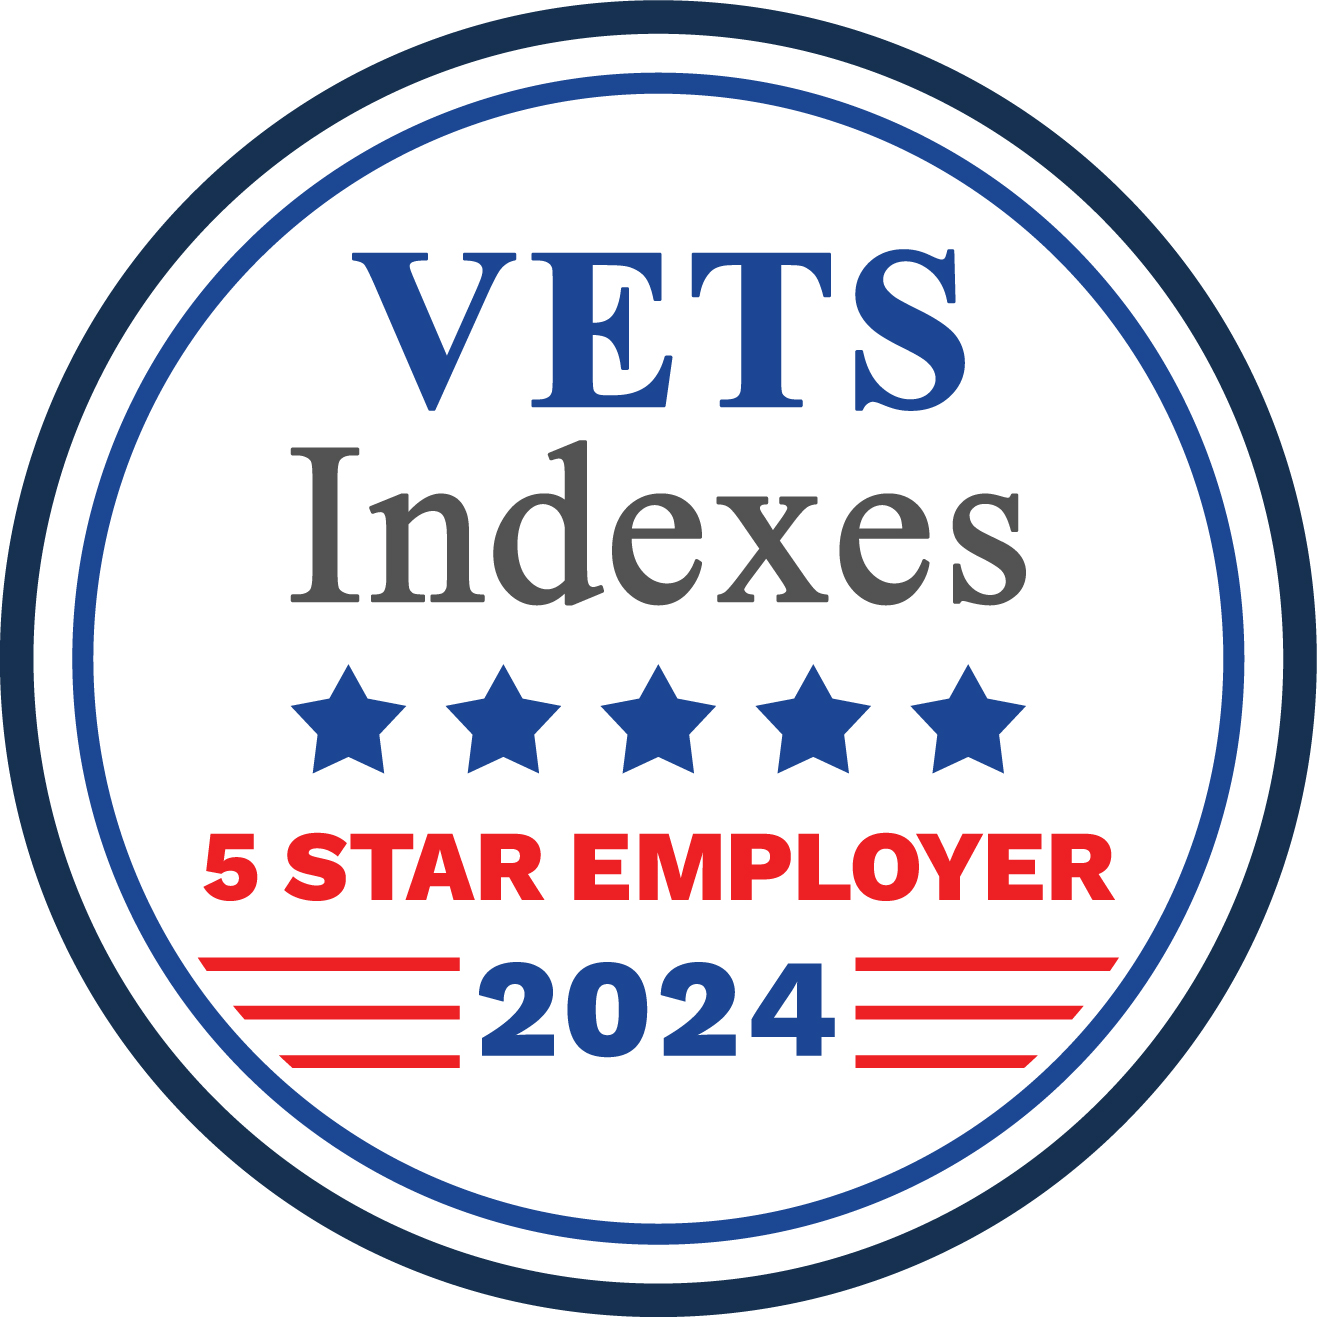 Vets Indexes: 5 Star Employer 2024